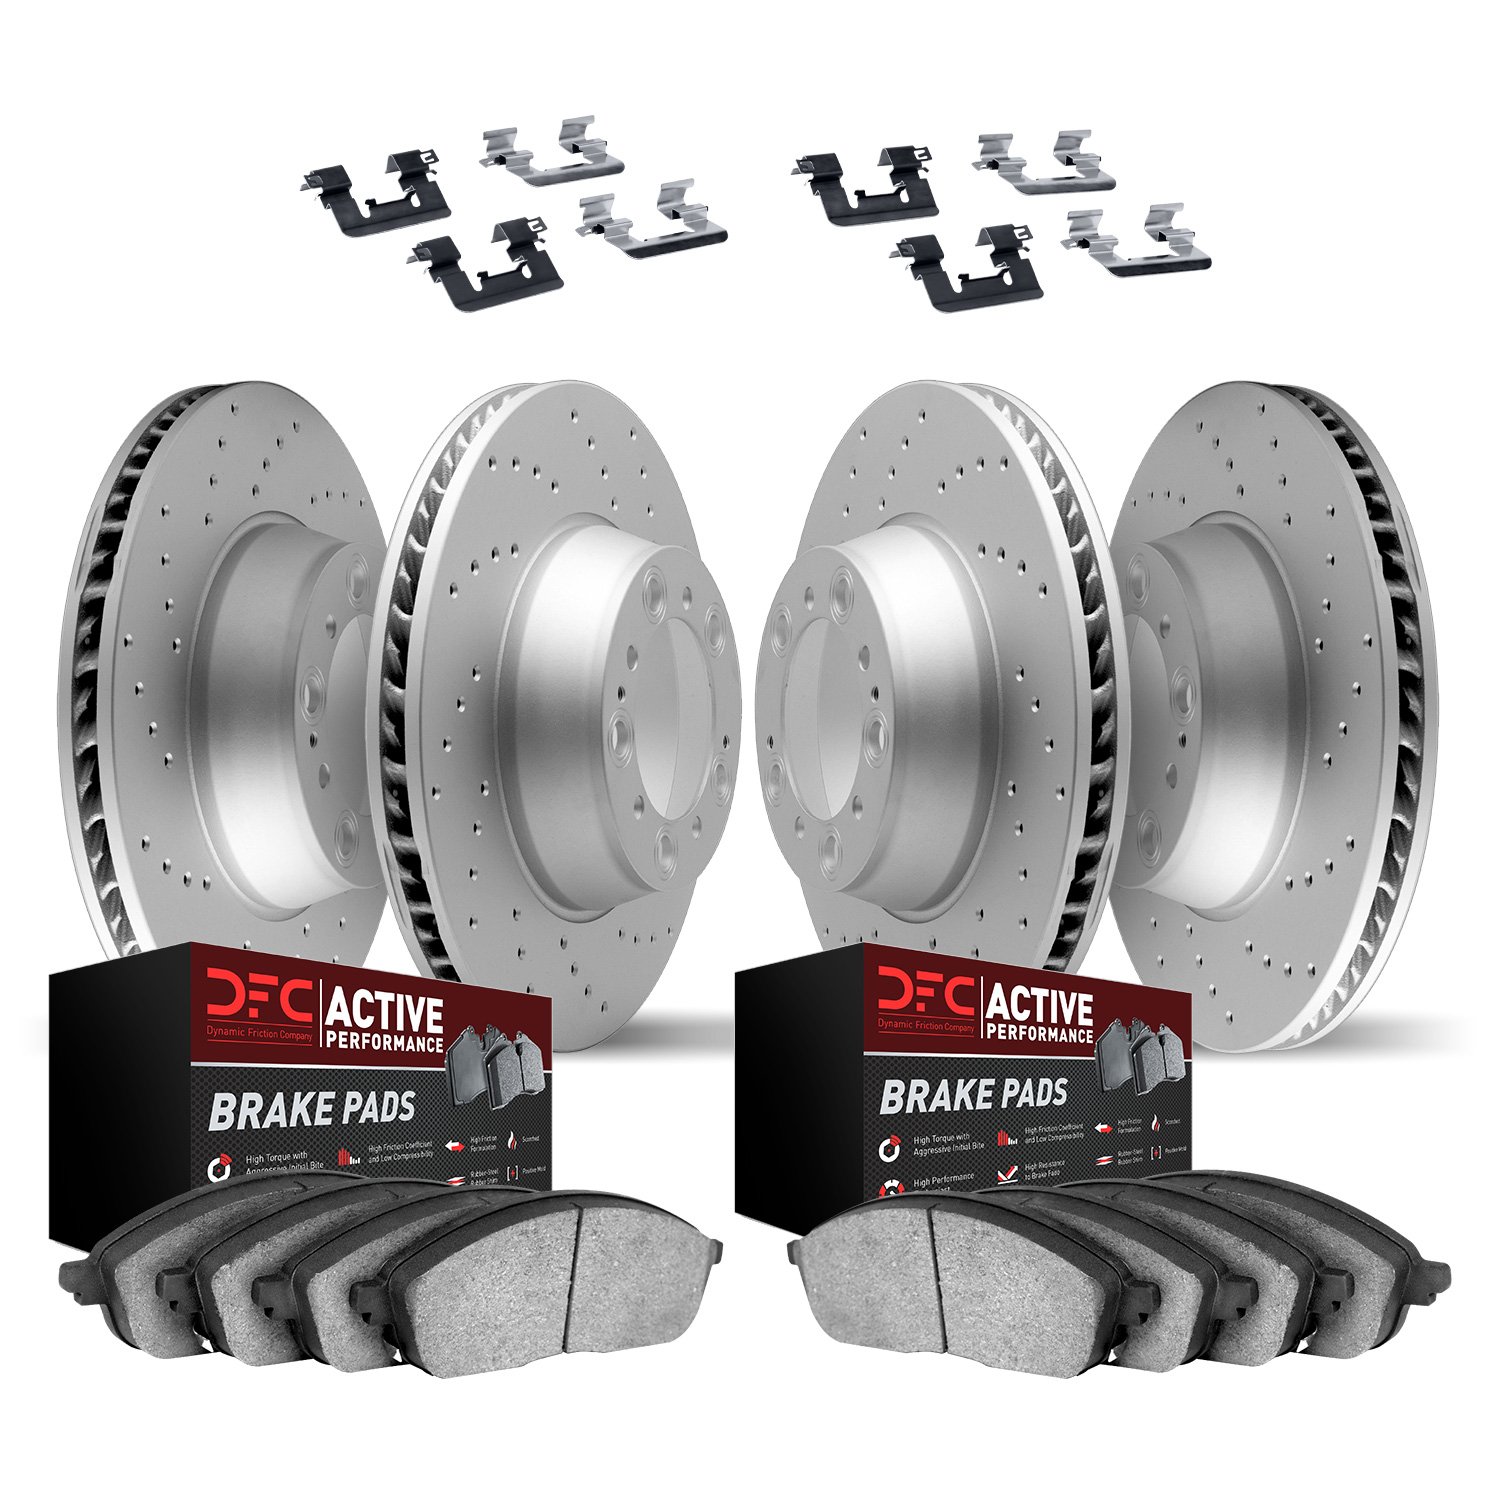 2714-80018 Geoperformance Drilled Brake Rotors with Active Performance Pads Kit & Hardware, 2004-2011 Ford/Lincoln/Mercury/Mazda